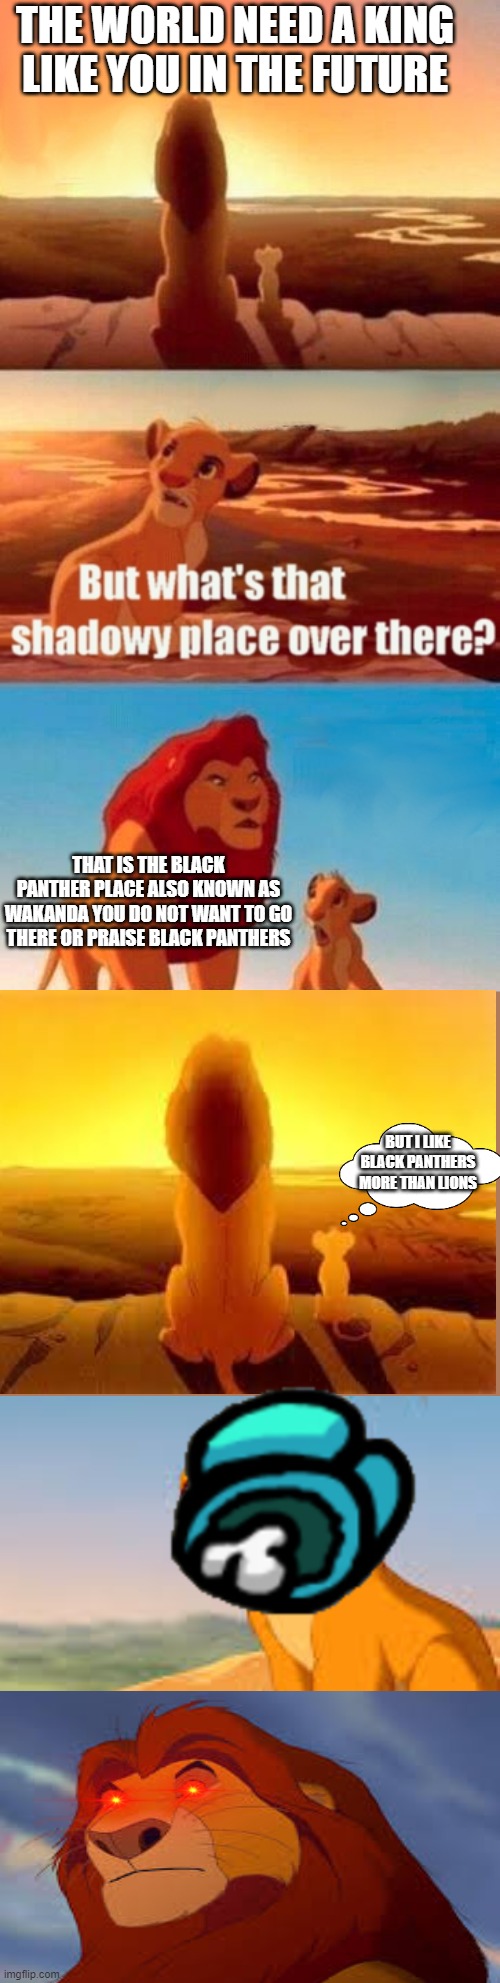 Simba Shadowy Place Meme | THE WORLD NEED A KING LIKE YOU IN THE FUTURE; THAT IS THE BLACK PANTHER PLACE ALSO KNOWN AS WAKANDA YOU DO NOT WANT TO GO THERE OR PRAISE BLACK PANTHERS; BUT I LIKE BLACK PANTHERS MORE THAN LIONS | image tagged in memes,simba shadowy place | made w/ Imgflip meme maker